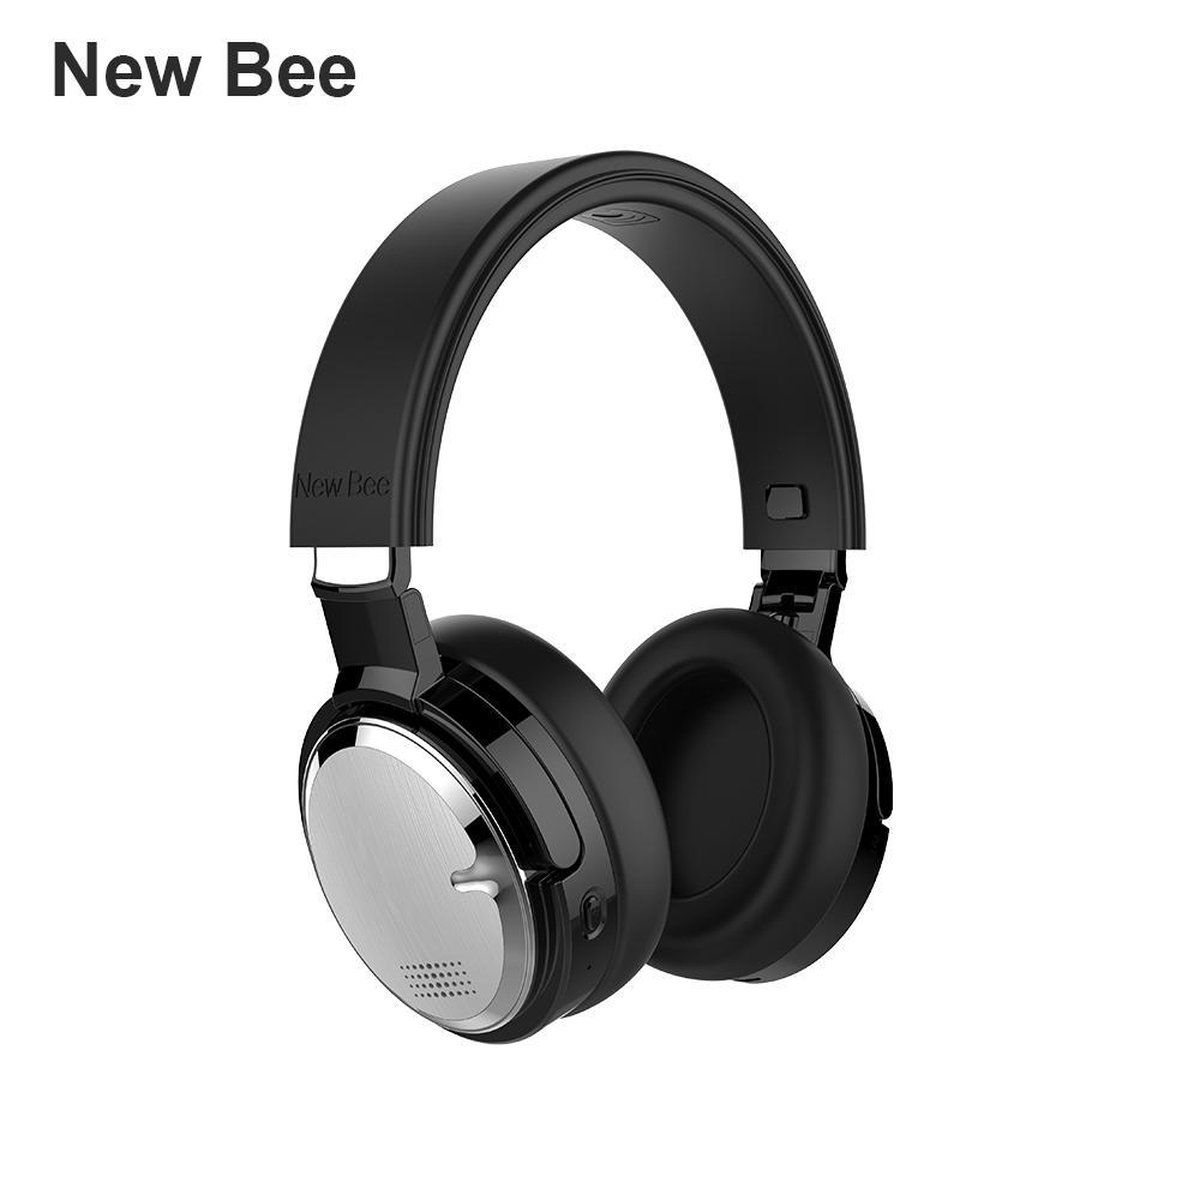 New Bee NB10 High Resolution Active Noise Cancelling Hoofdtelefoon (ANC)